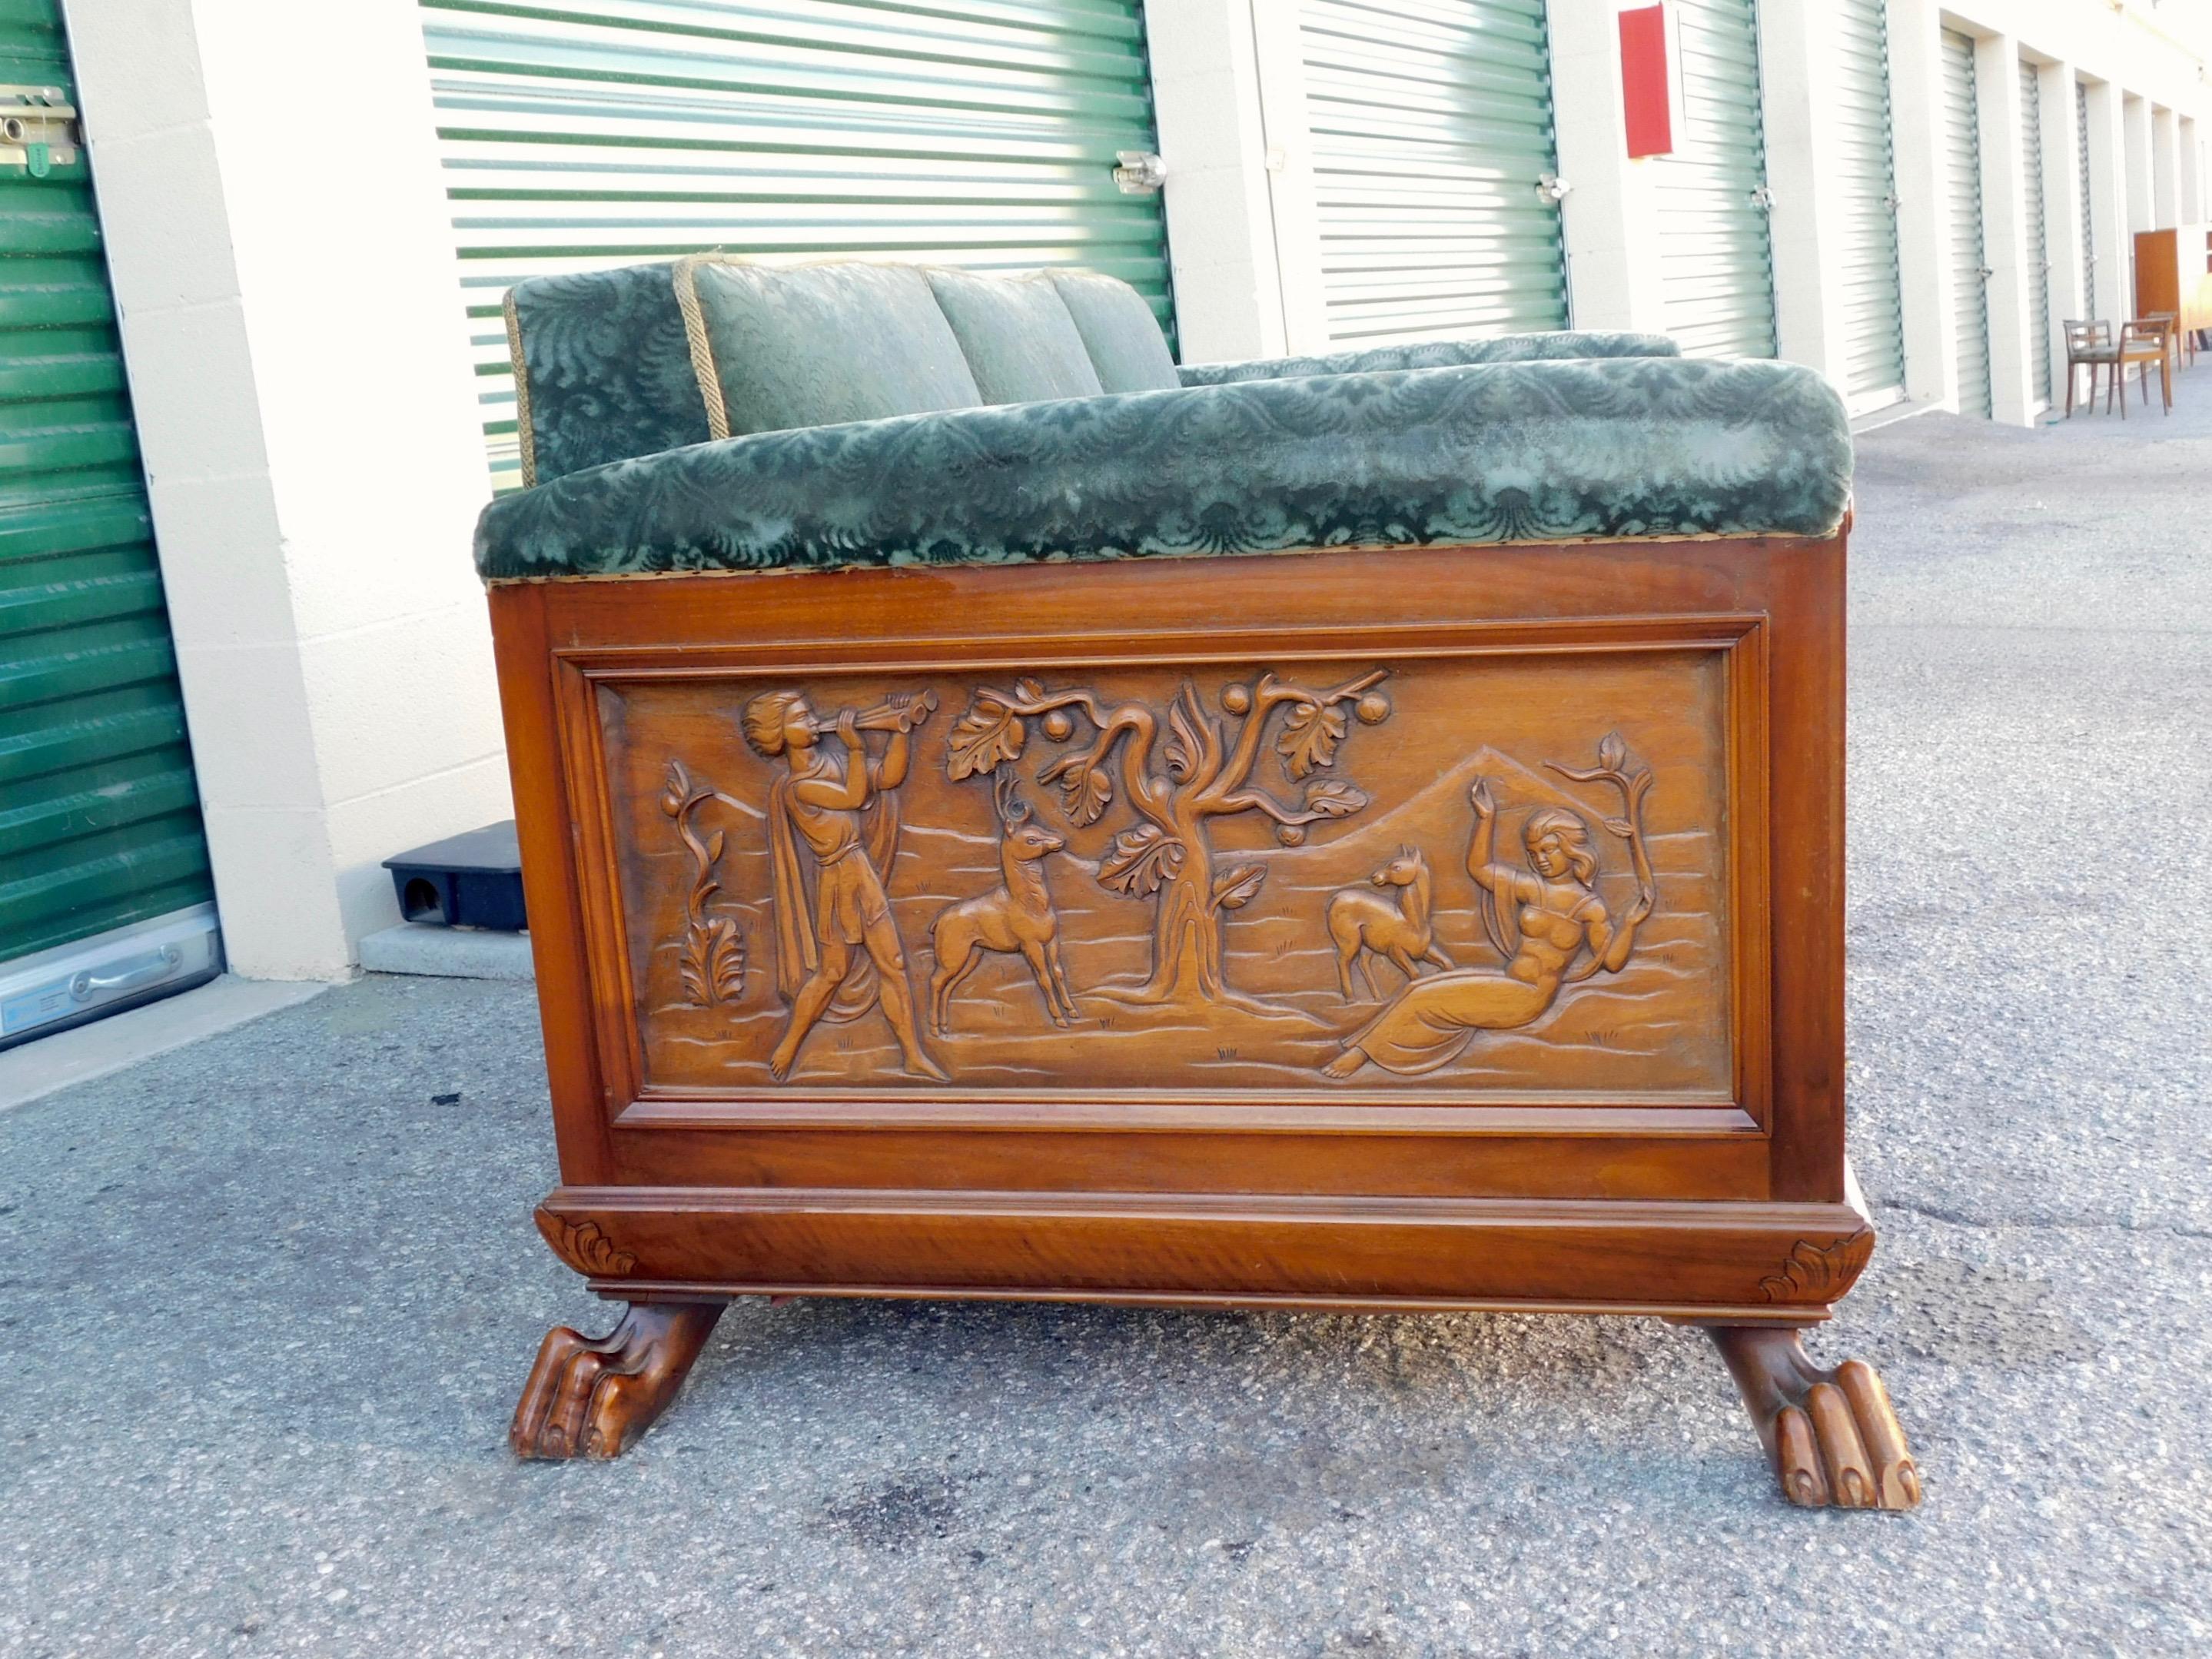 Extremely rare Swedish Art Deco panelled sofa with claw feet (front and back) by renowned Swedish designer, Eugen Höglund. Rendered in stained birch wood. Panels depict scenes from mythology and allegorical figures. All original in original fabric.